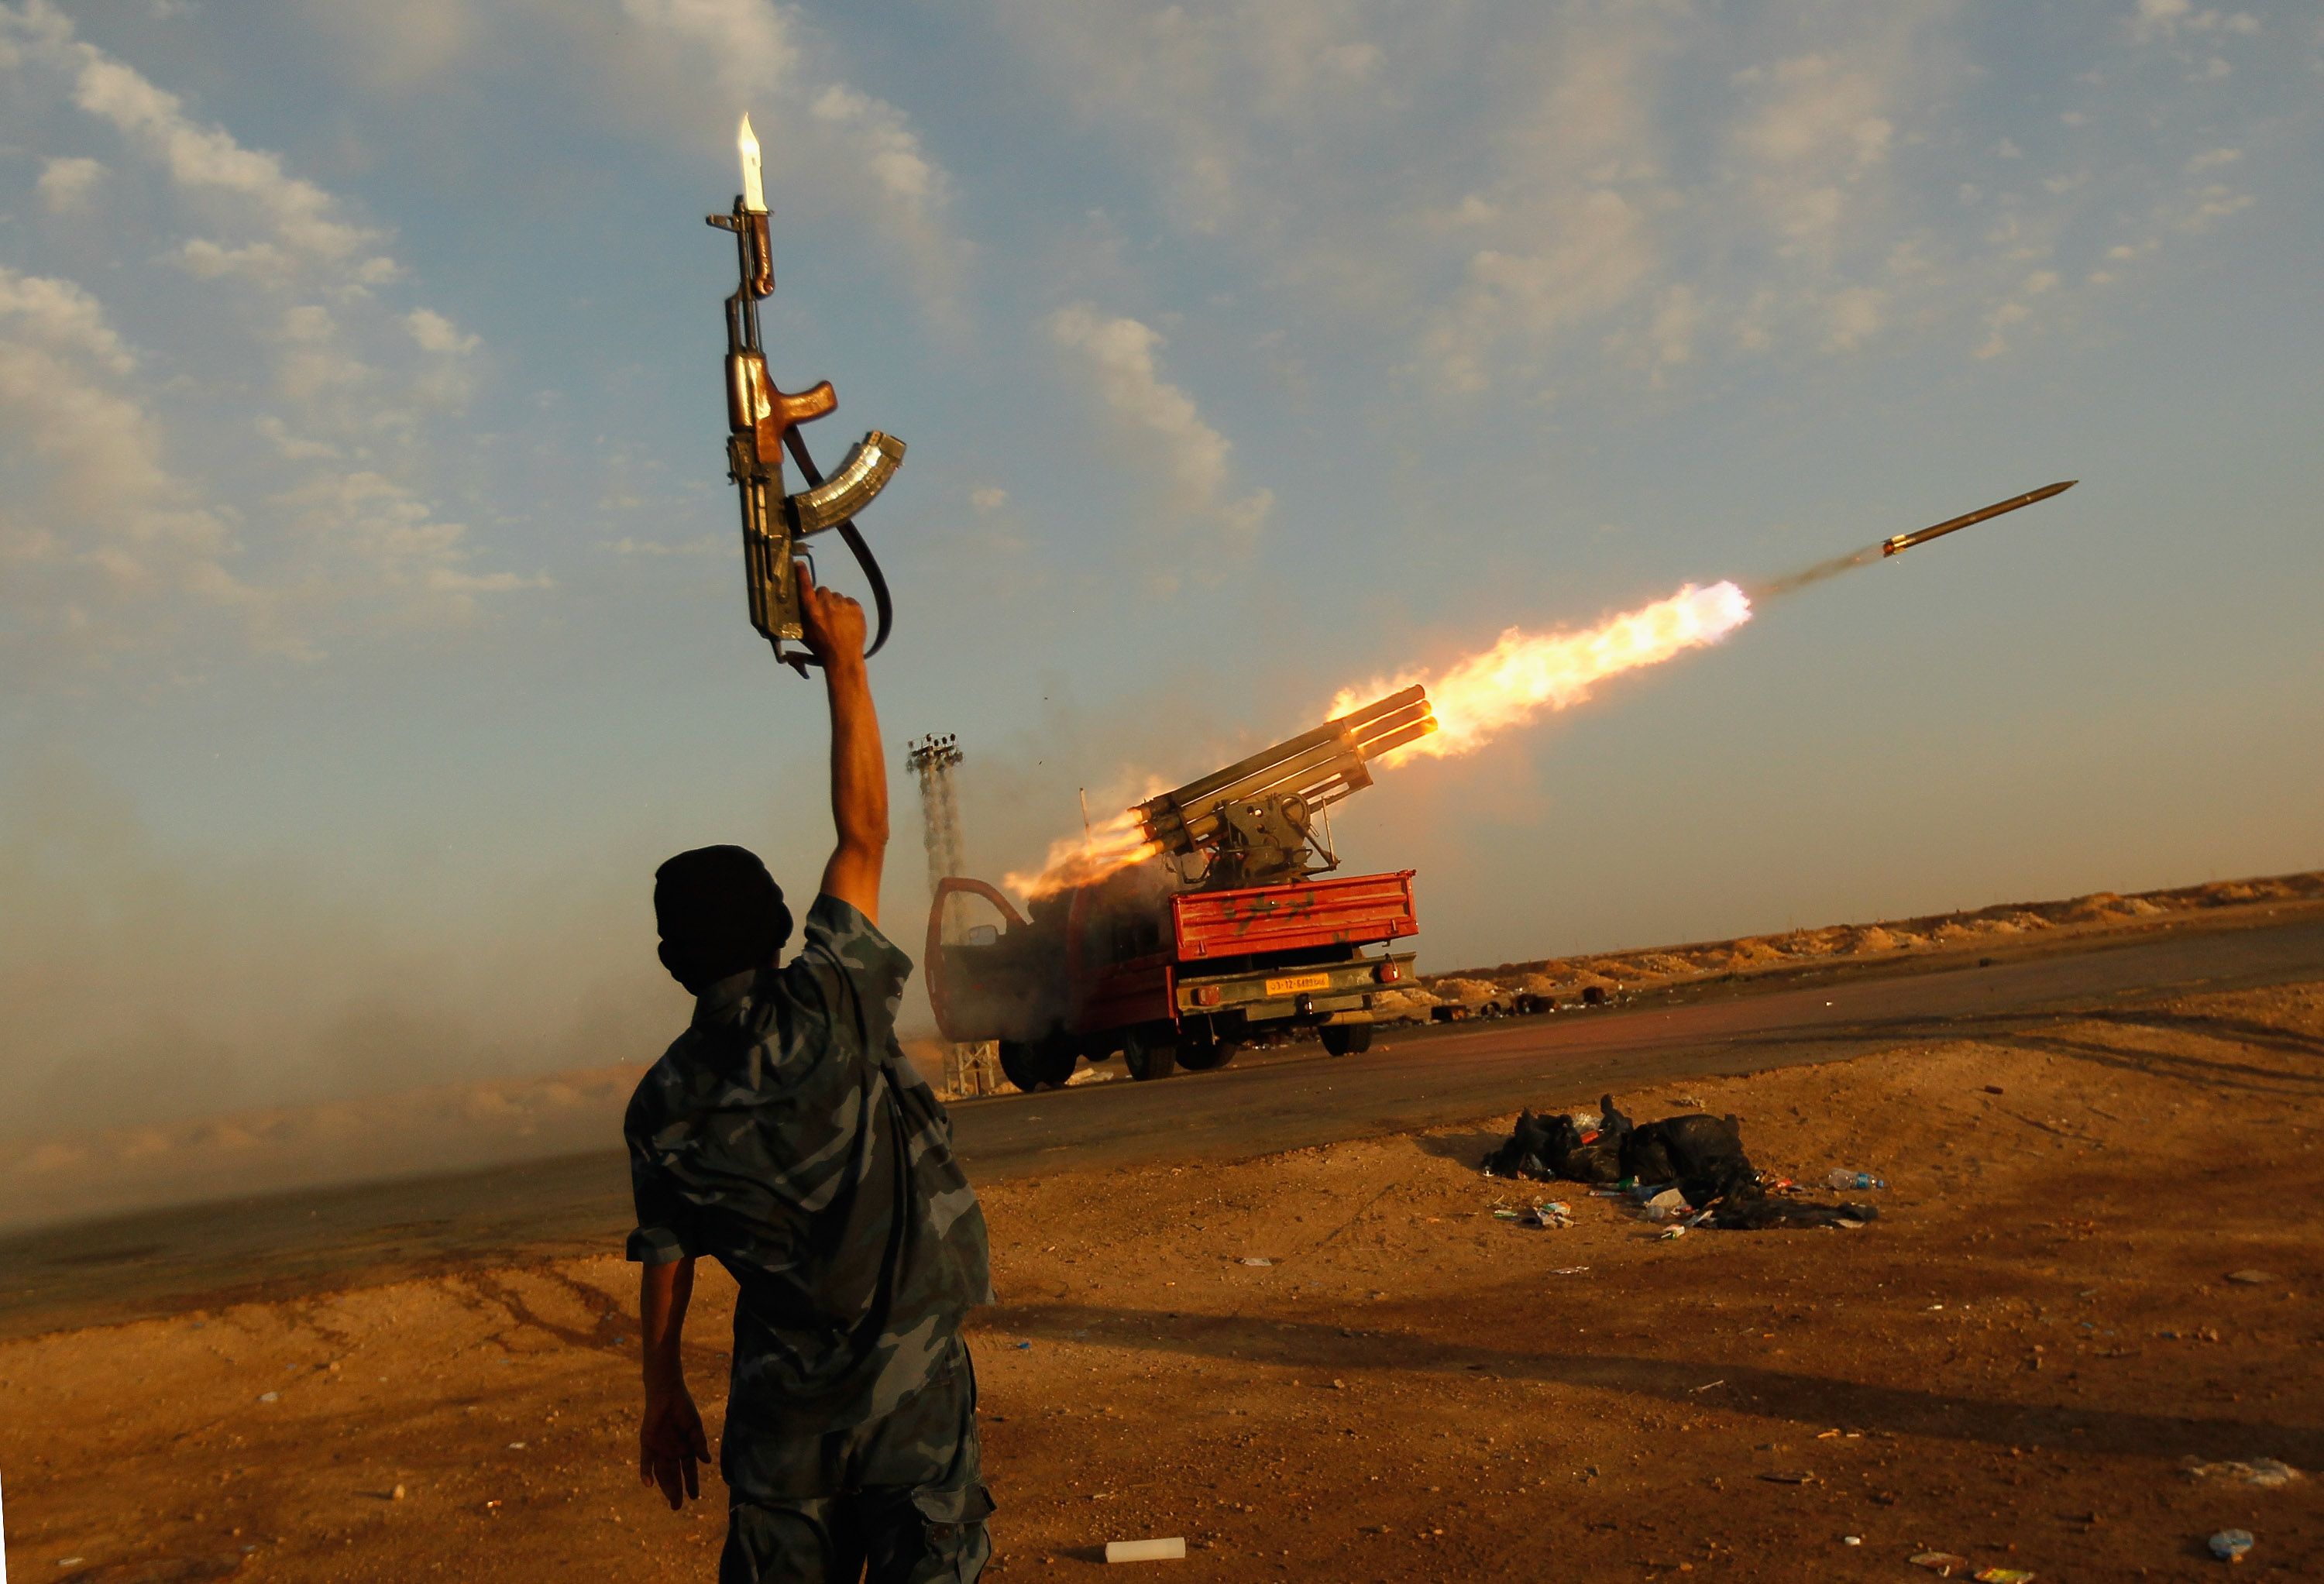 A rebel fighter celebrates as his comrades fire a rocket barrage toward the positions of troops loyal to Libyan ruler Muammar Gaddafi April 14, 2011